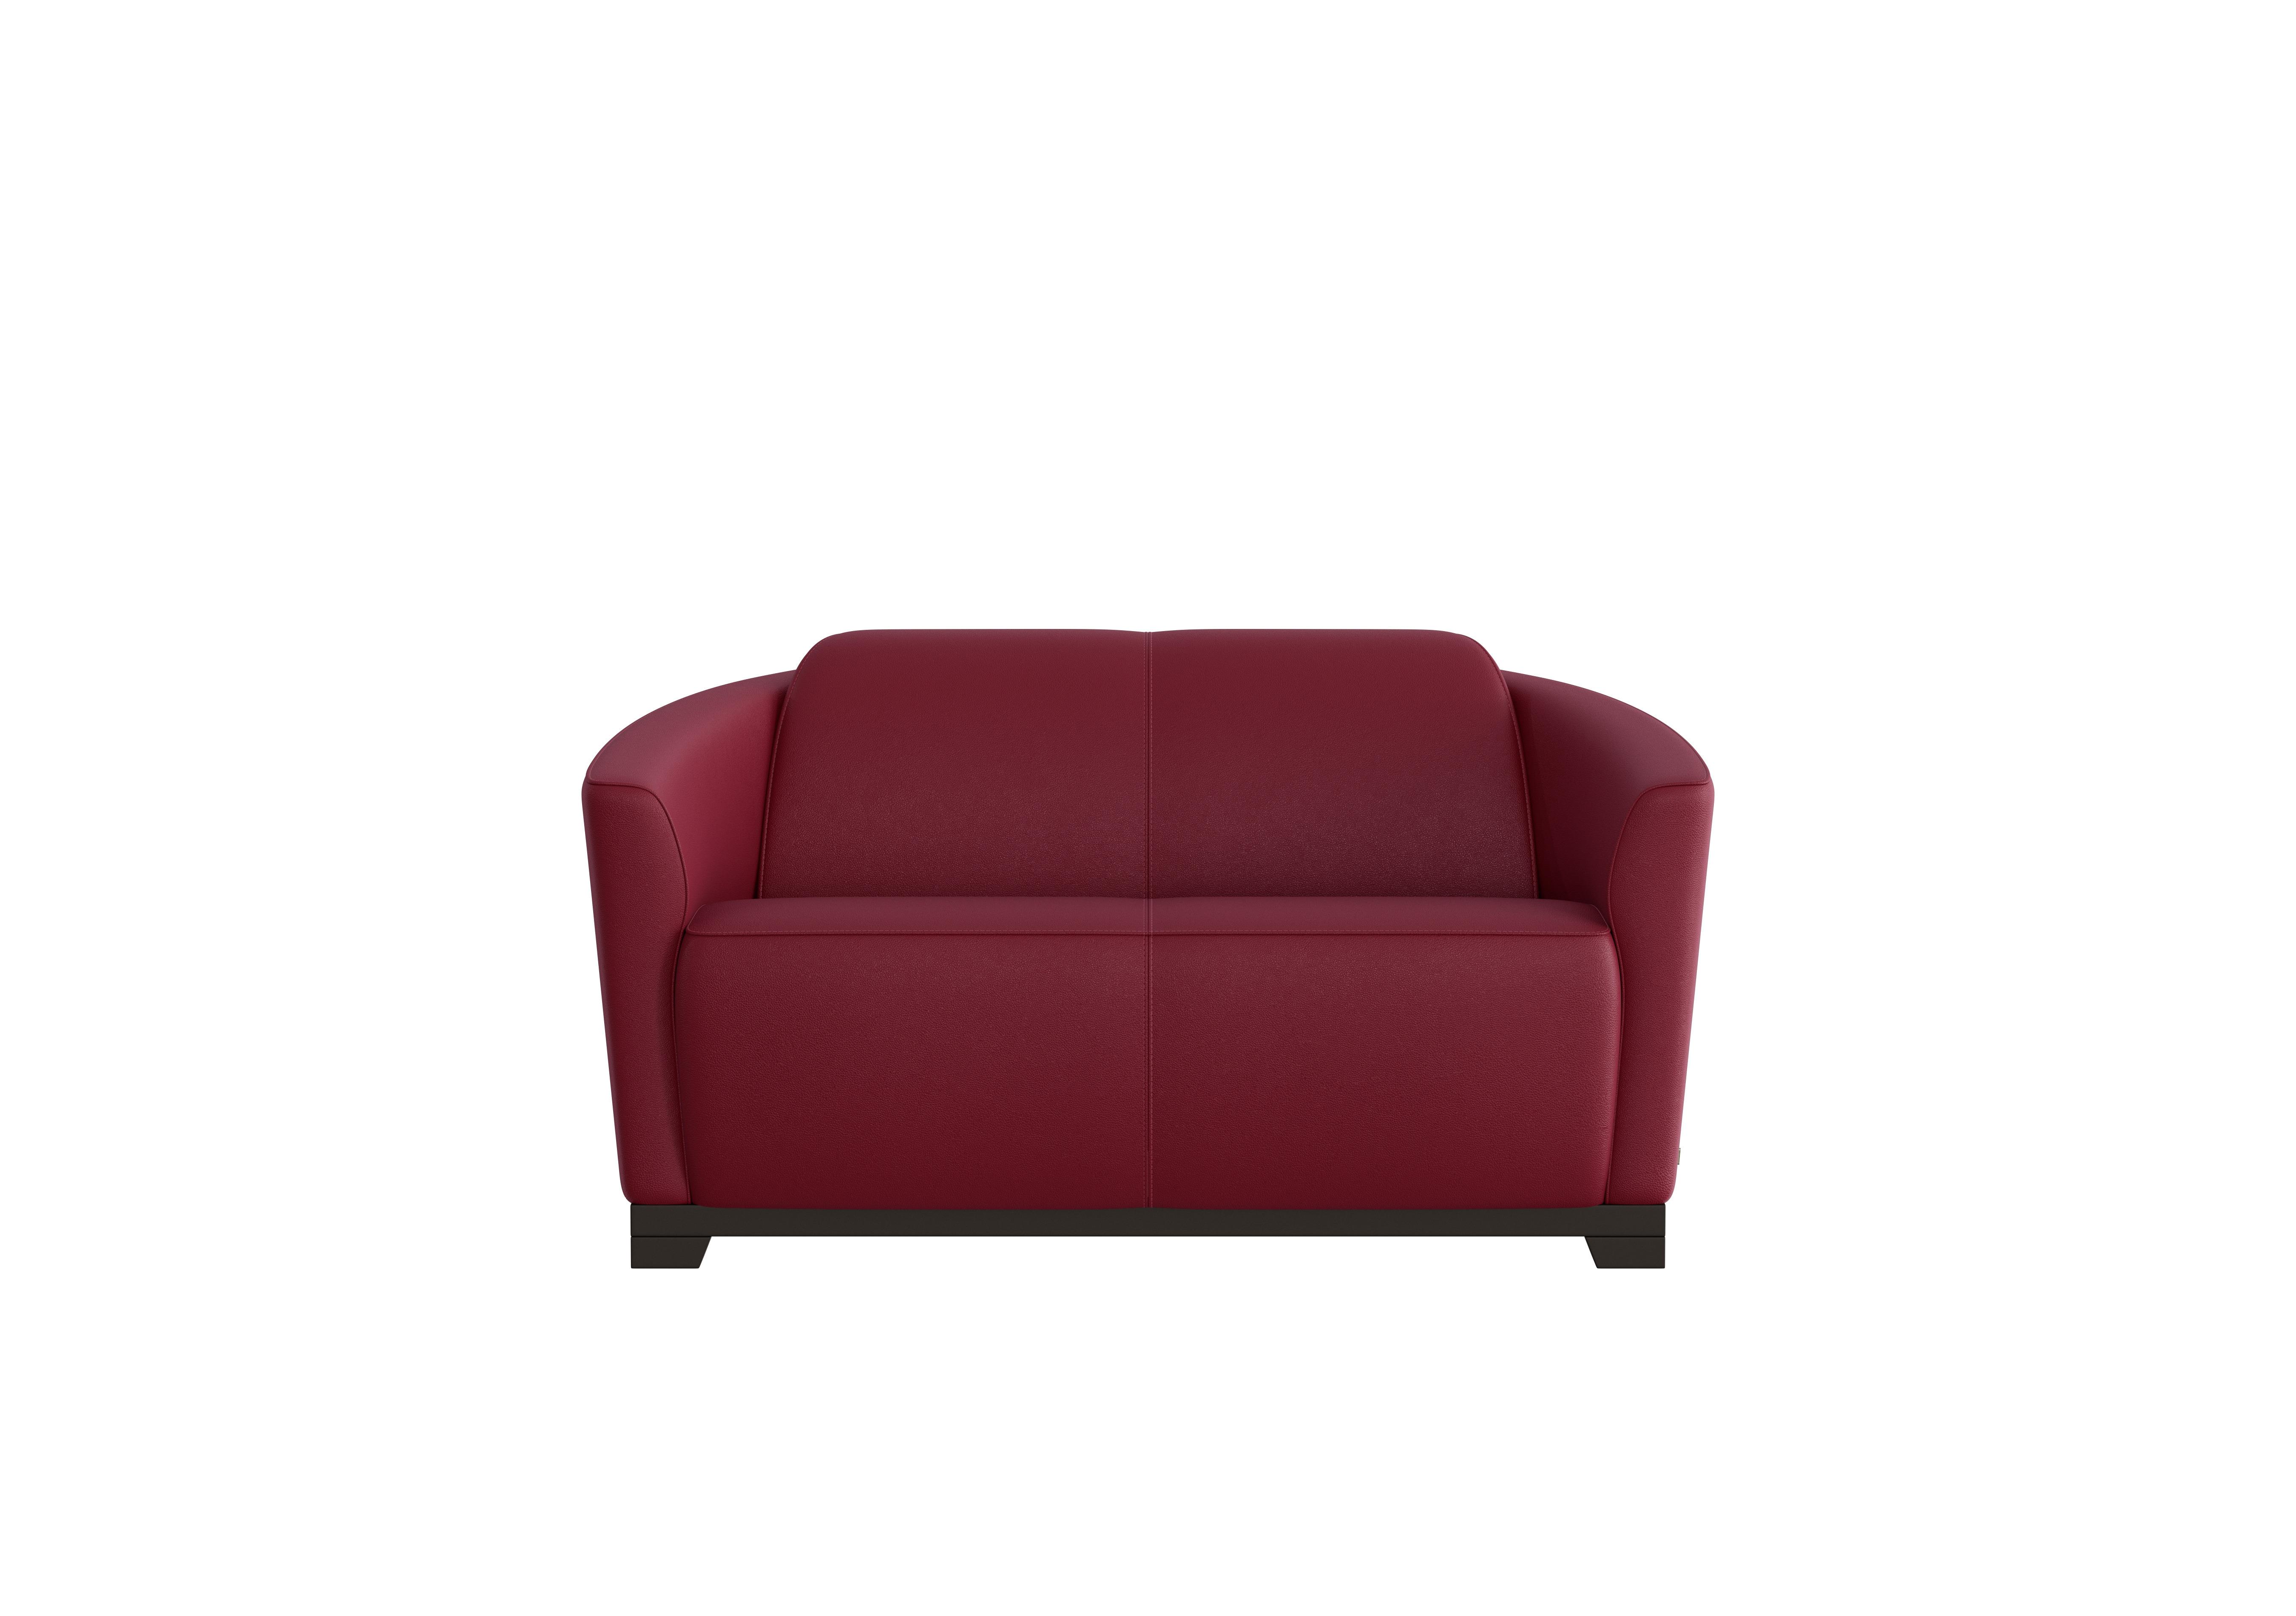 Ketty 2 Seater Leather Sofa in Dali Bordeaux 1521 on Furniture Village